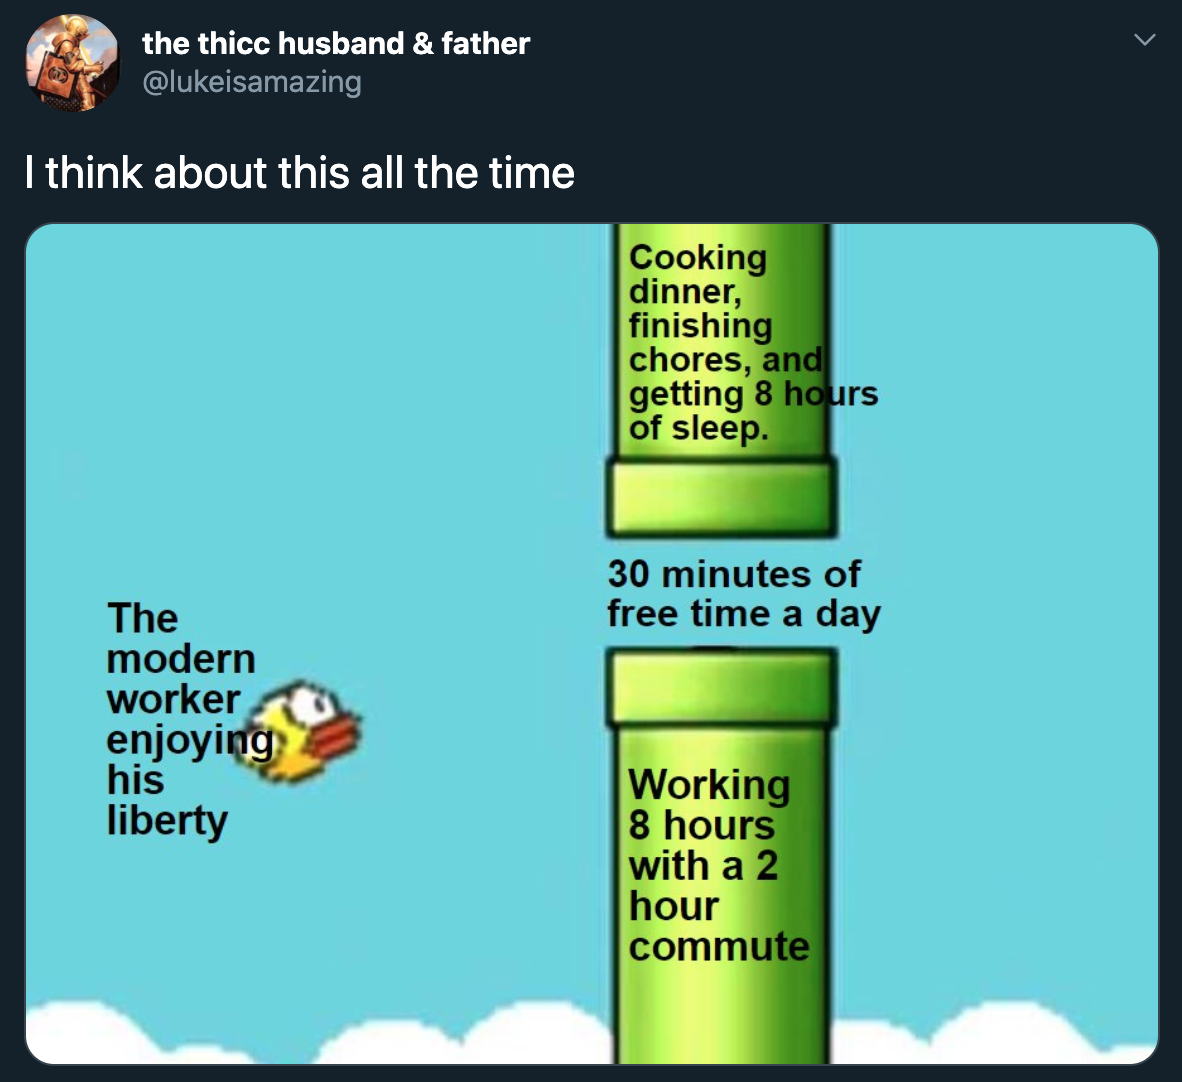 software - the thicc husband & father I think about this all the time Cooking dinner, finishing chores, and getting 8 hours of sleep. 30 minutes of free time a day The modern worker enjoying his liberty Working 8 hours with a 2 hour commute